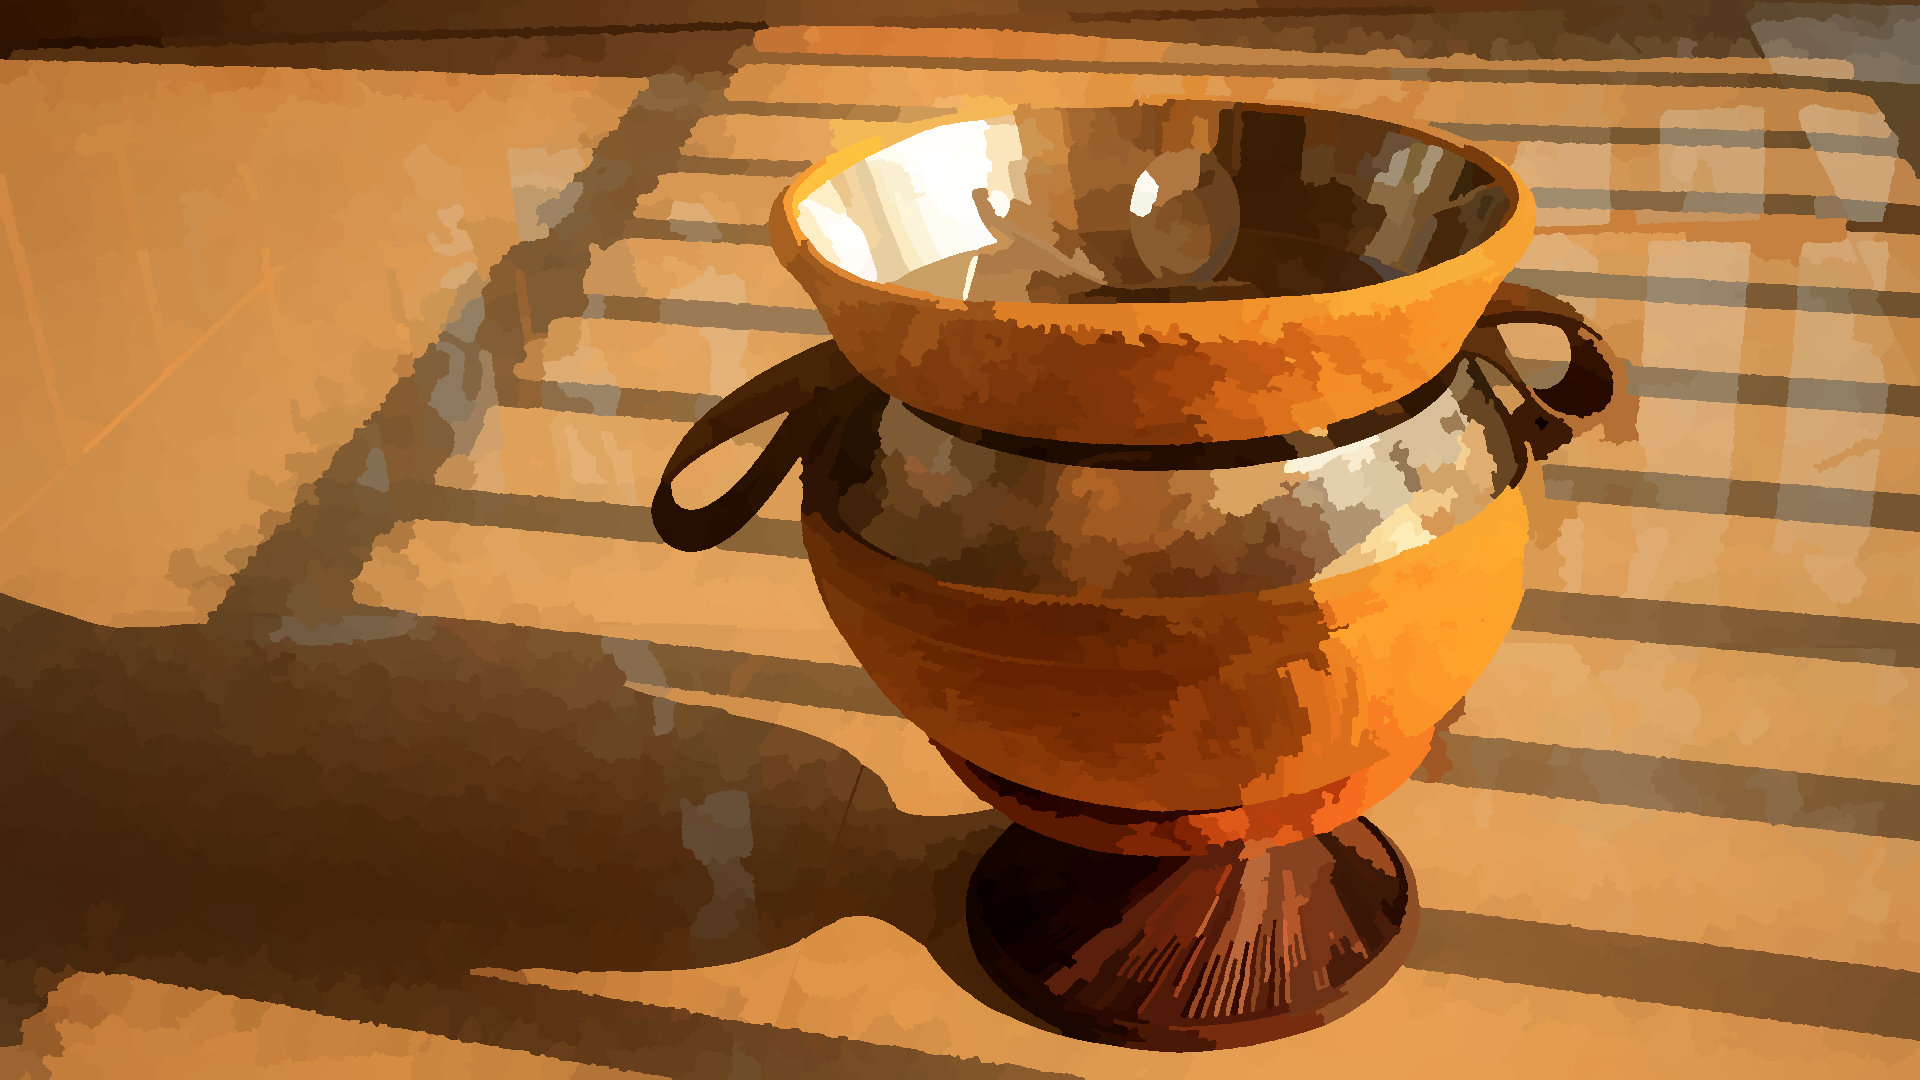 A monk's bowl basking in the sun 2